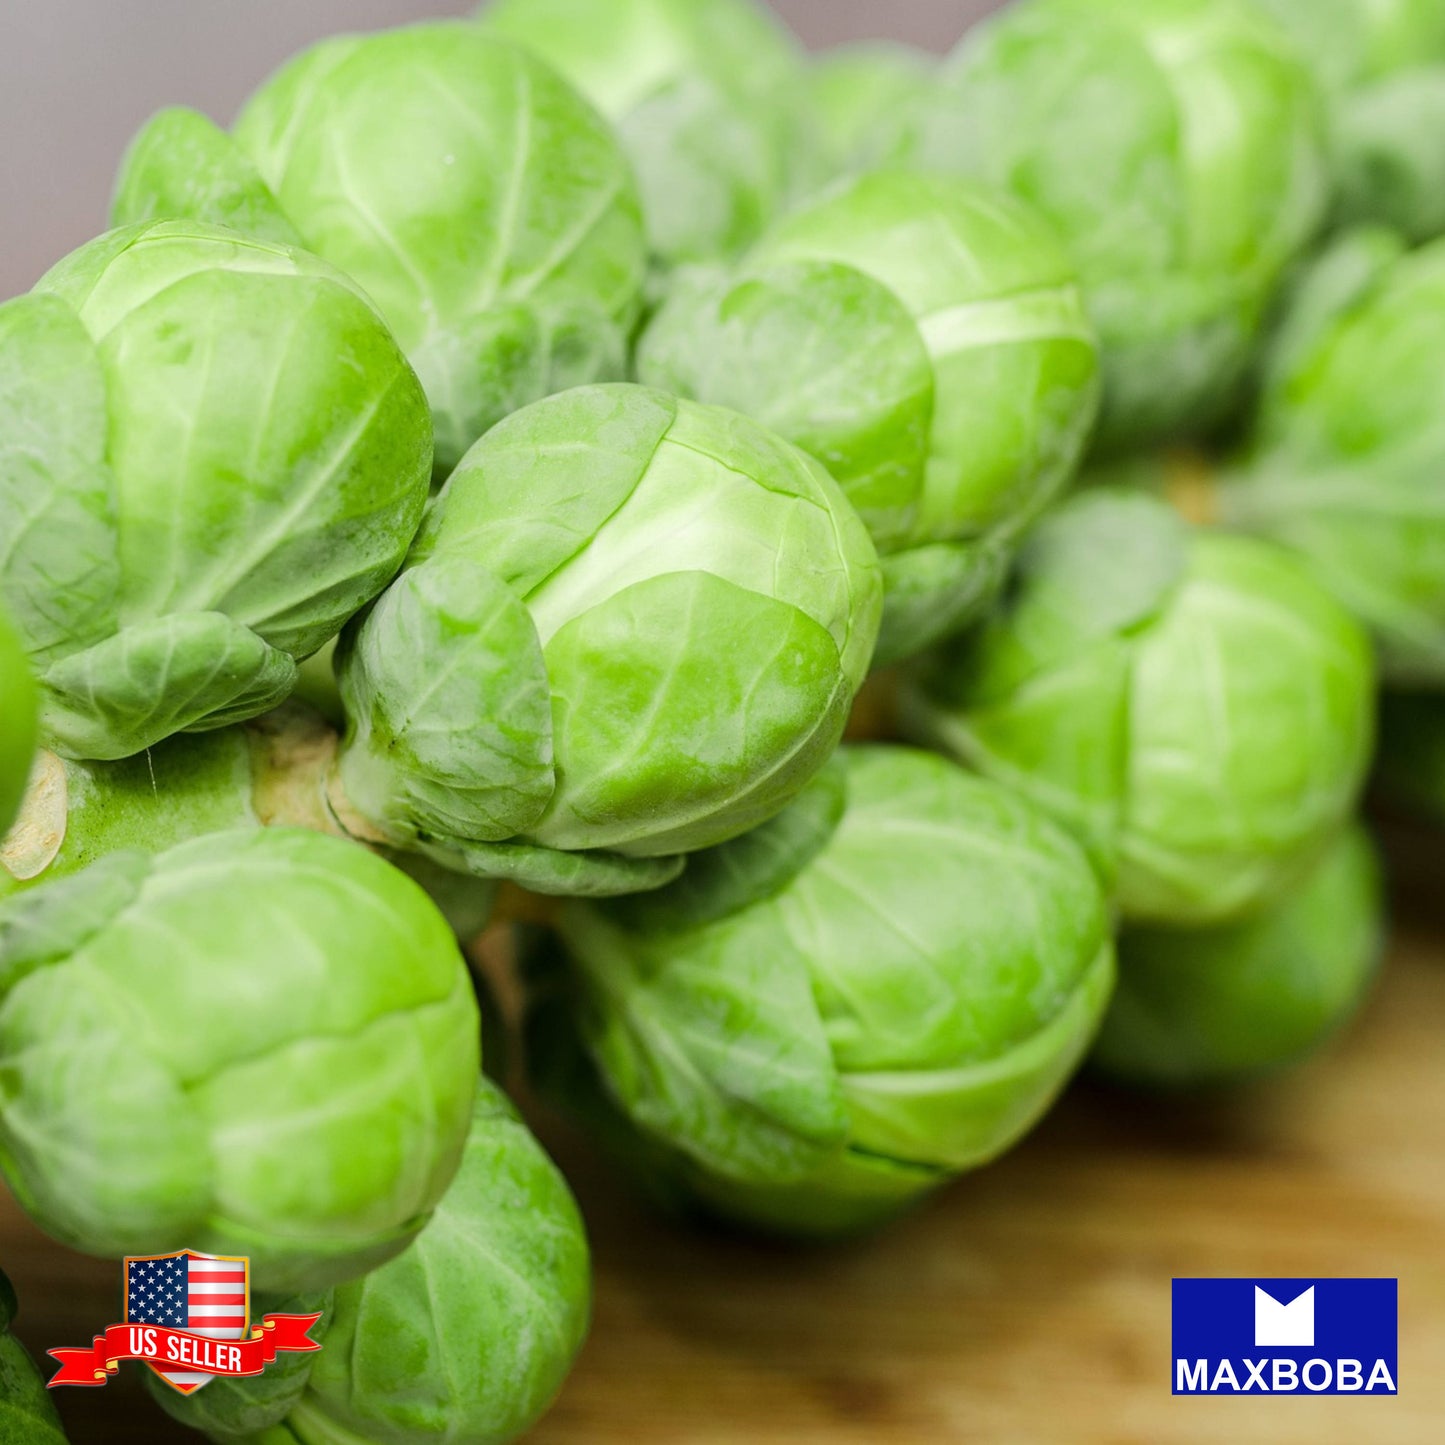 Brussels Sprouts Seeds - Catskill Non-GMO Heirloom Vegetable Garden